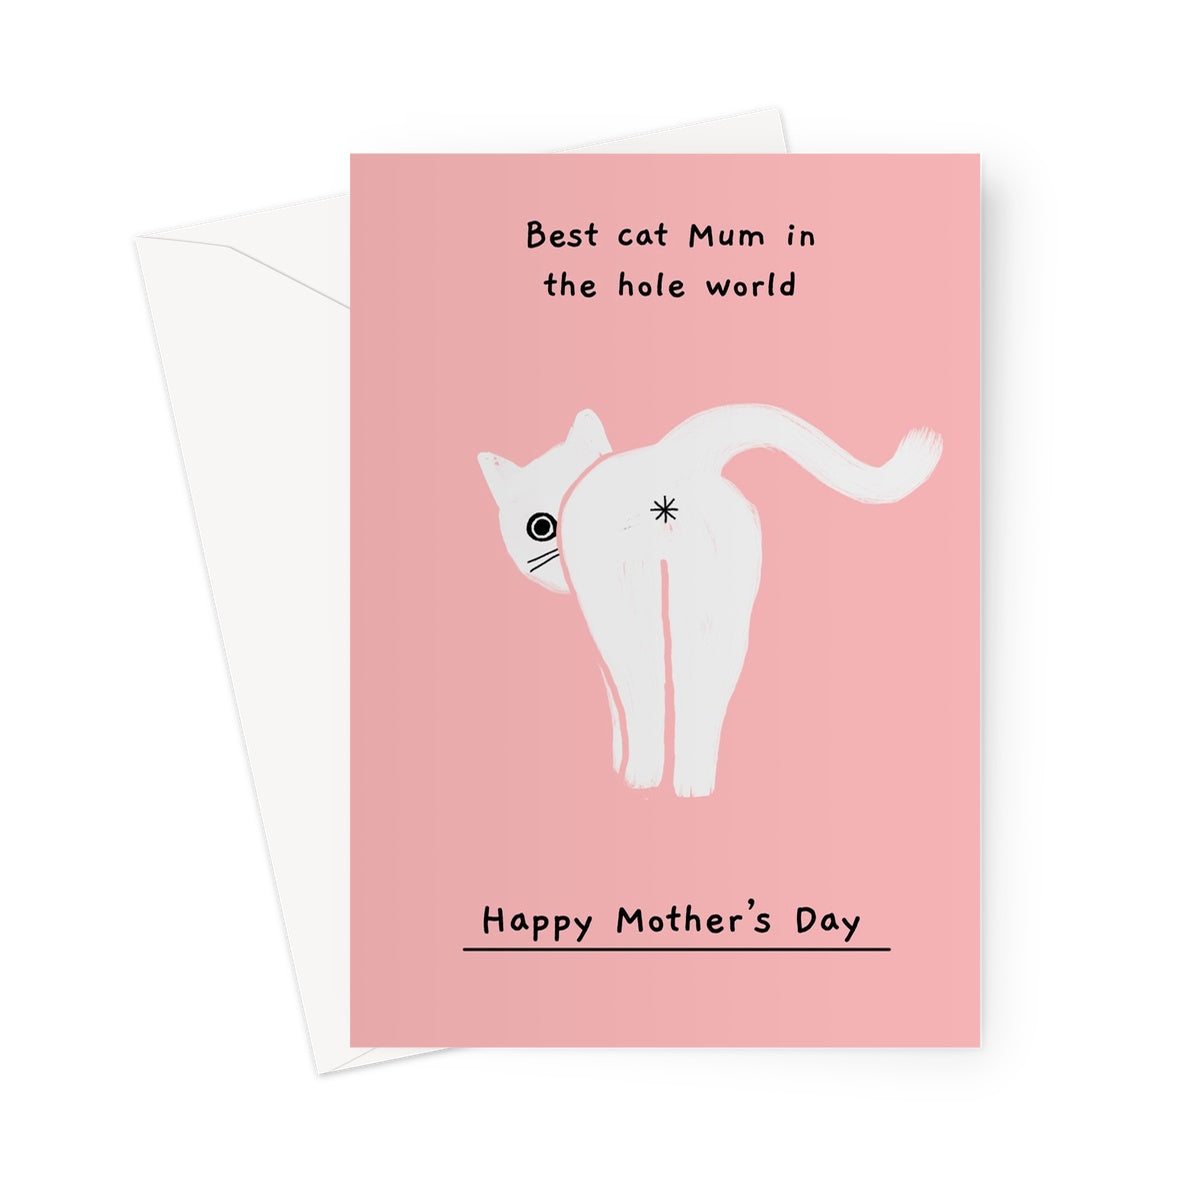 Best Cat Mum in the Hole World - Happy Mother's Day Card